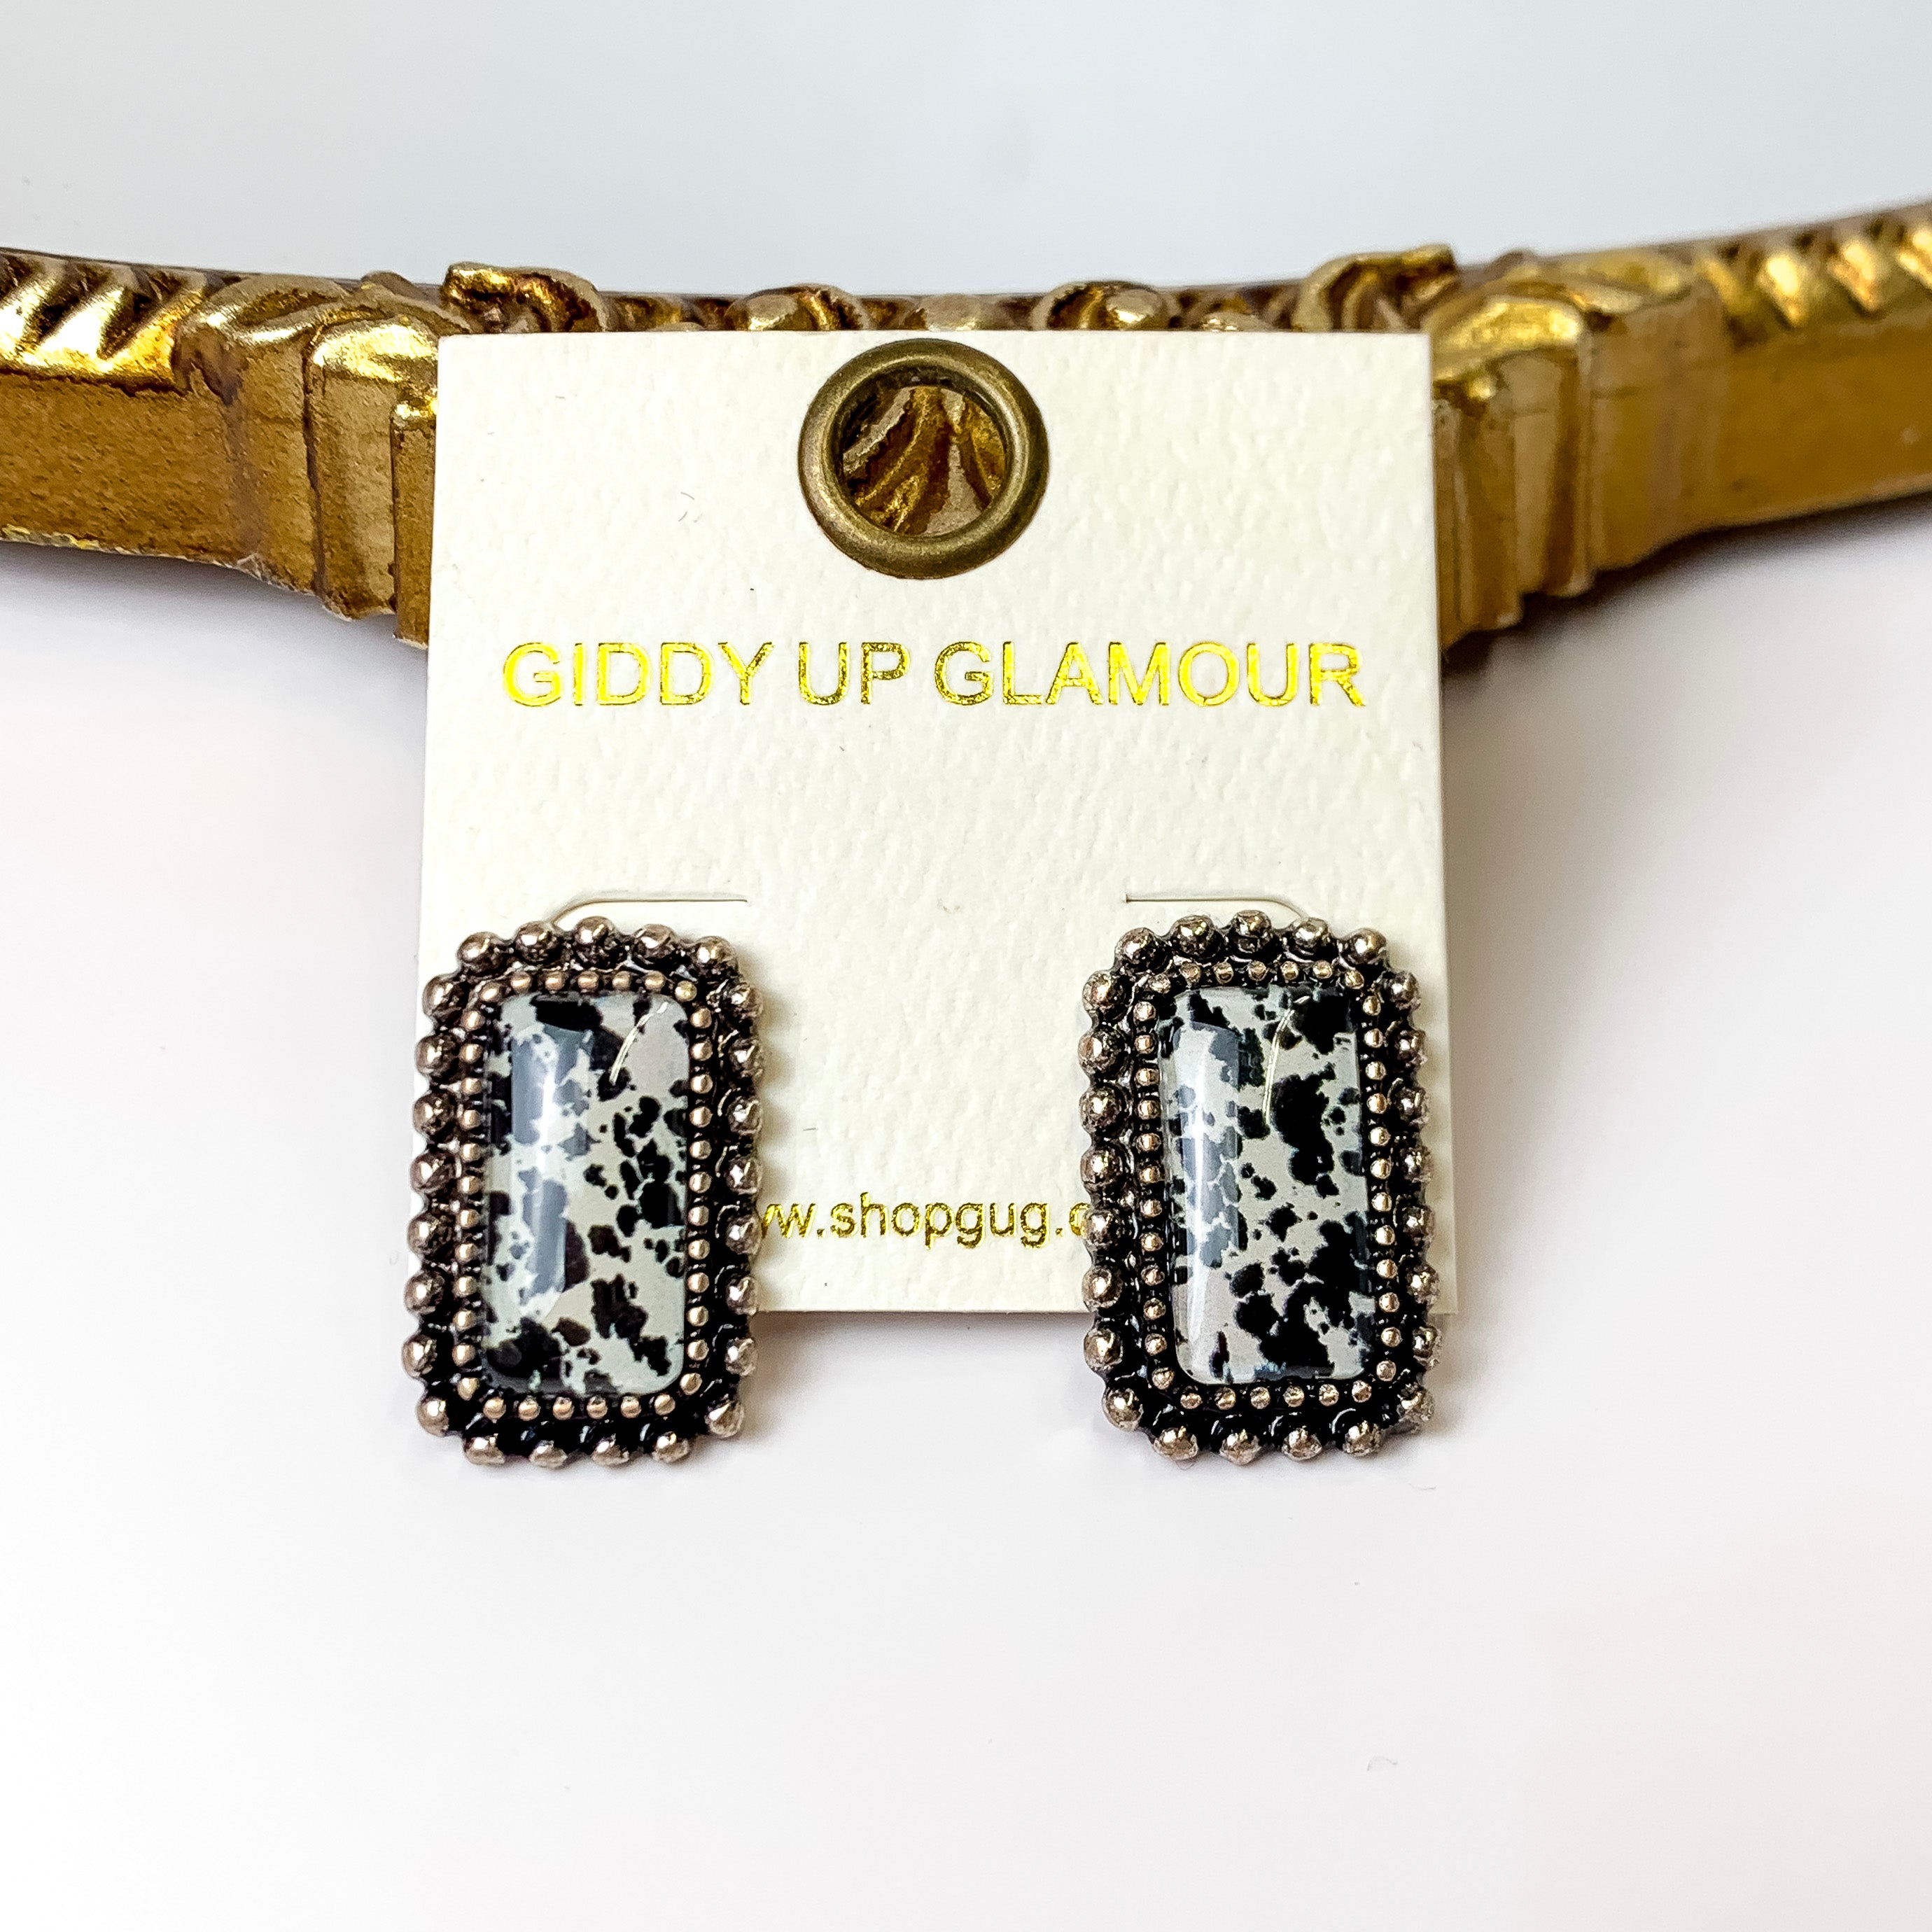 Silver Tone Rectangle Earrings with Black Cow Print Inlay - Giddy Up Glamour Boutique